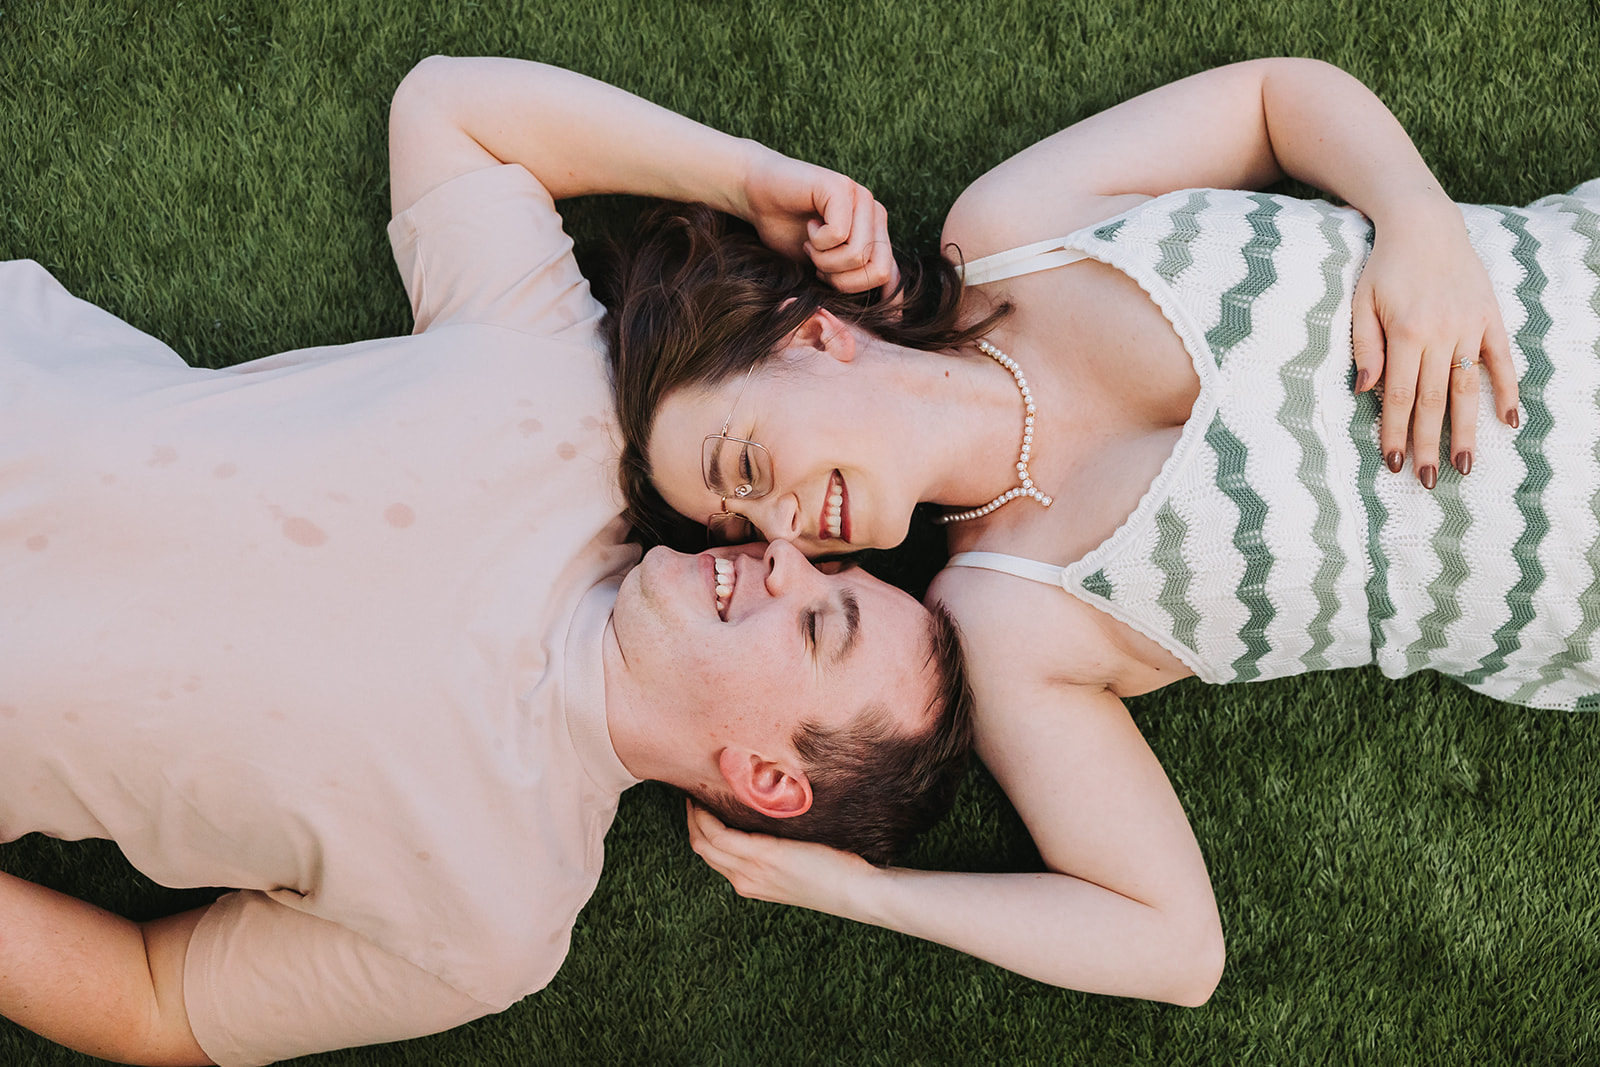 sweet and silly engagement photo ideas